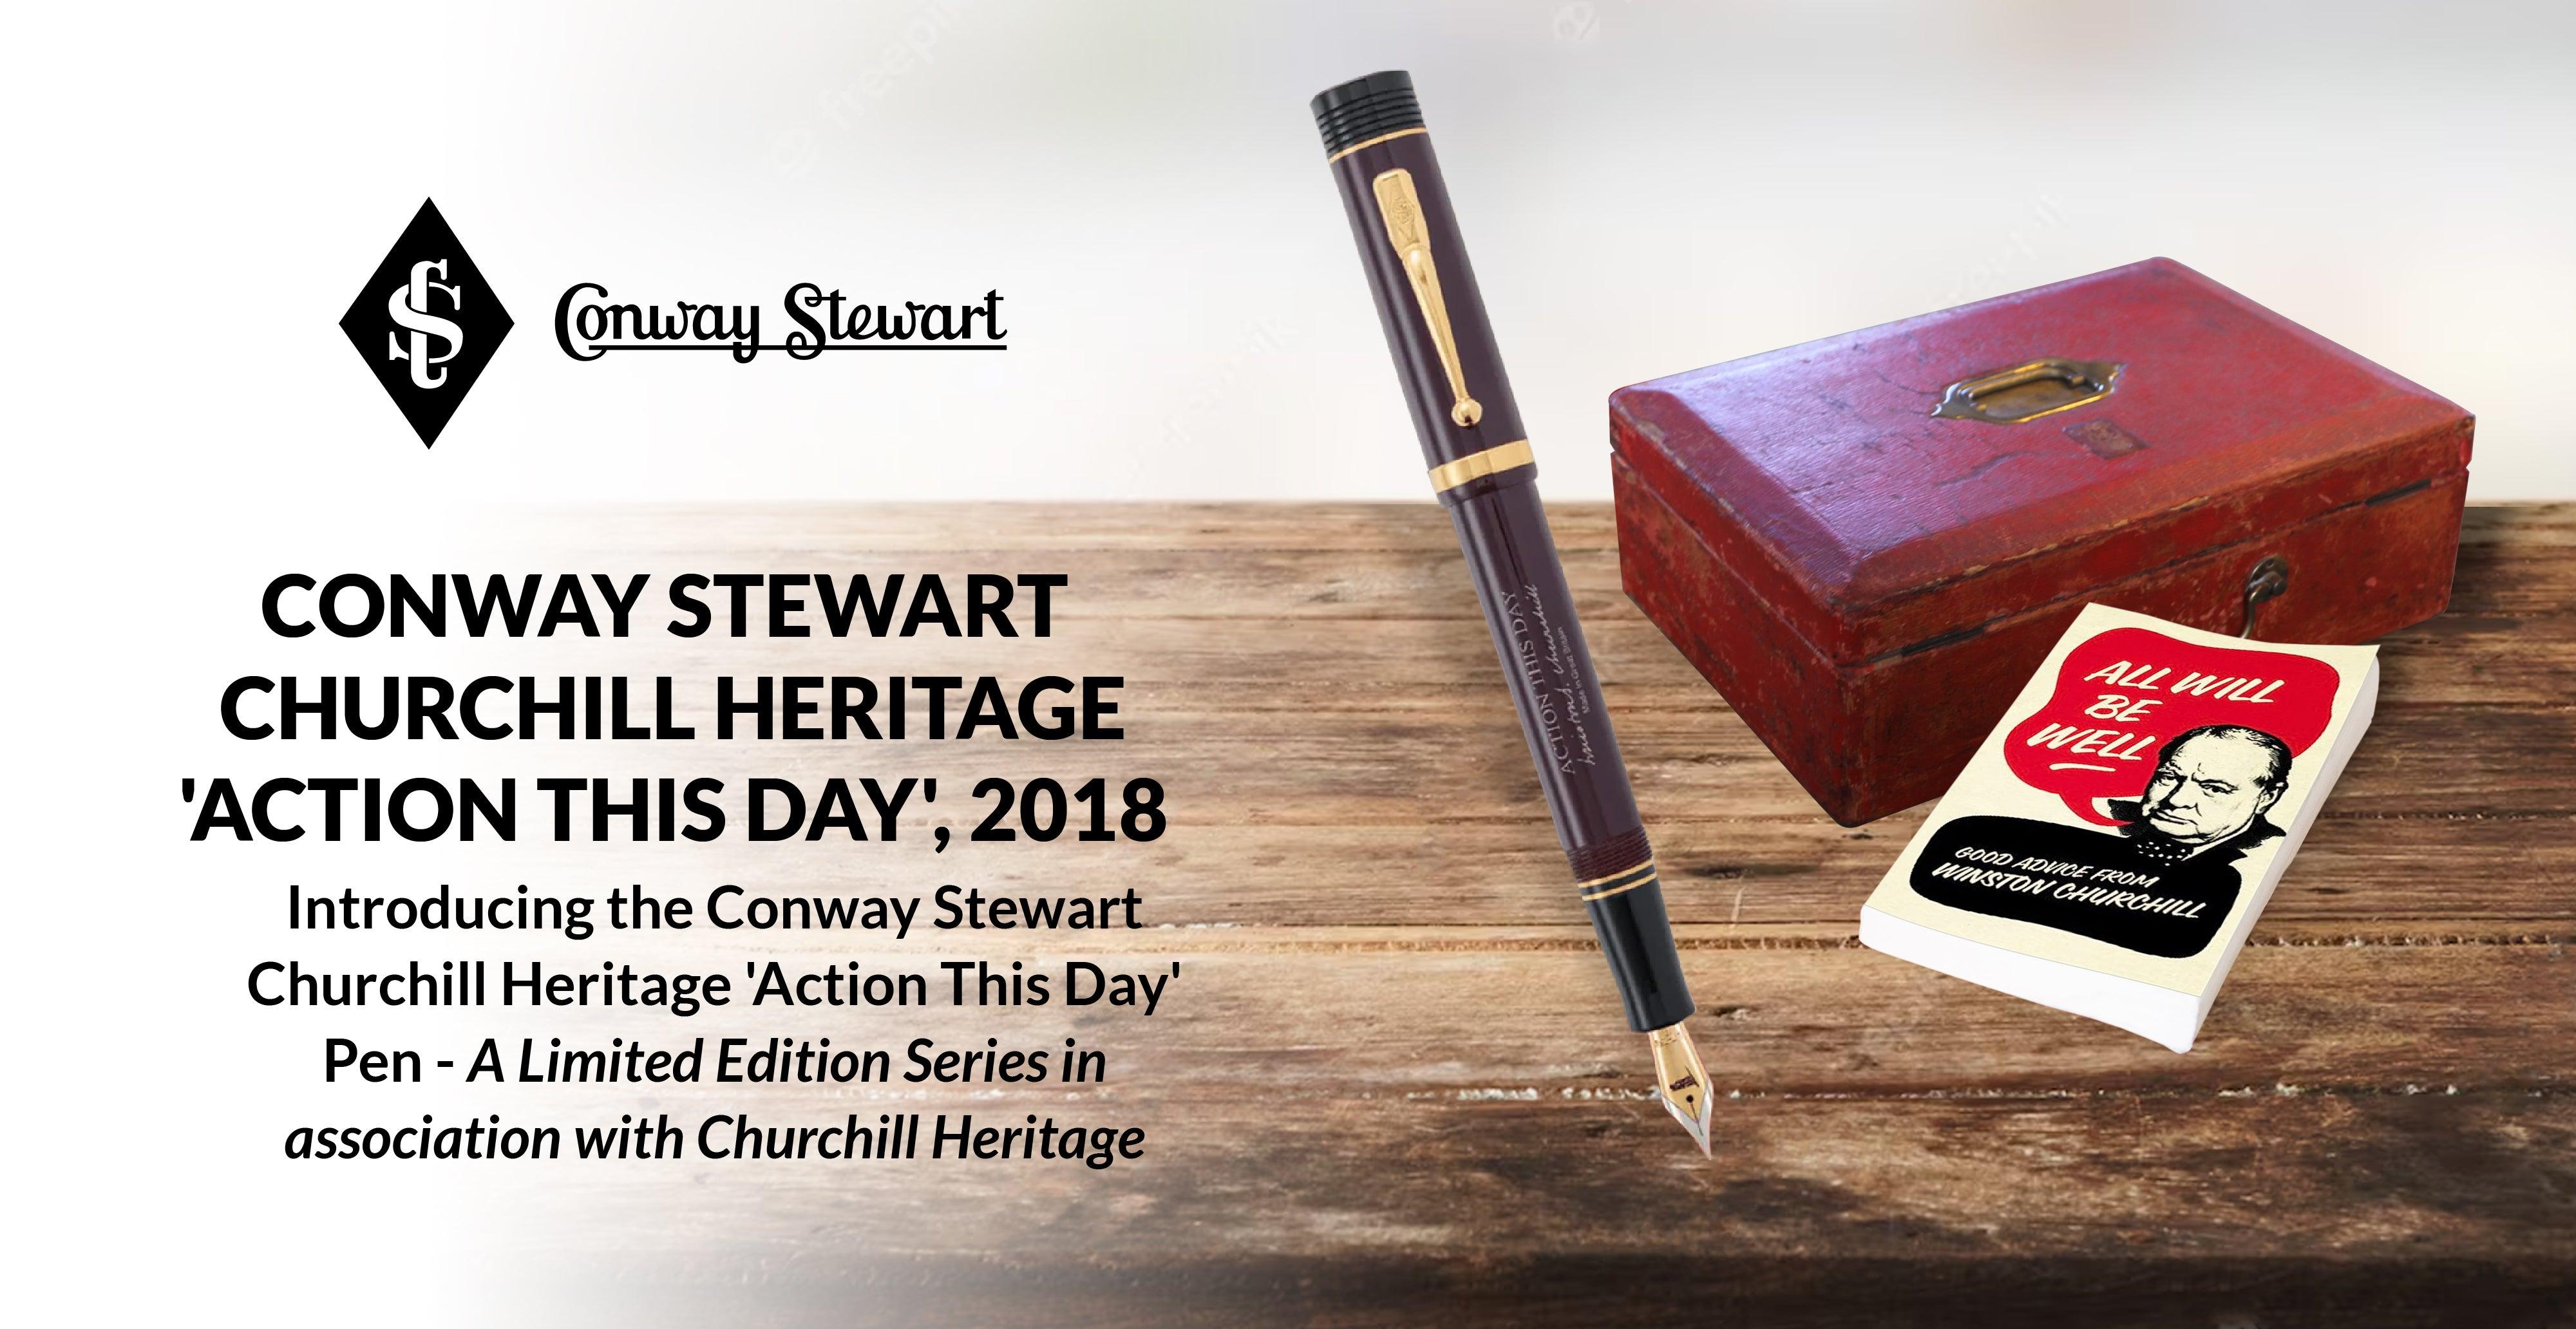 Conway Stewart Churchill Heritage 'Action This Day', 2018 - Conway Stewart